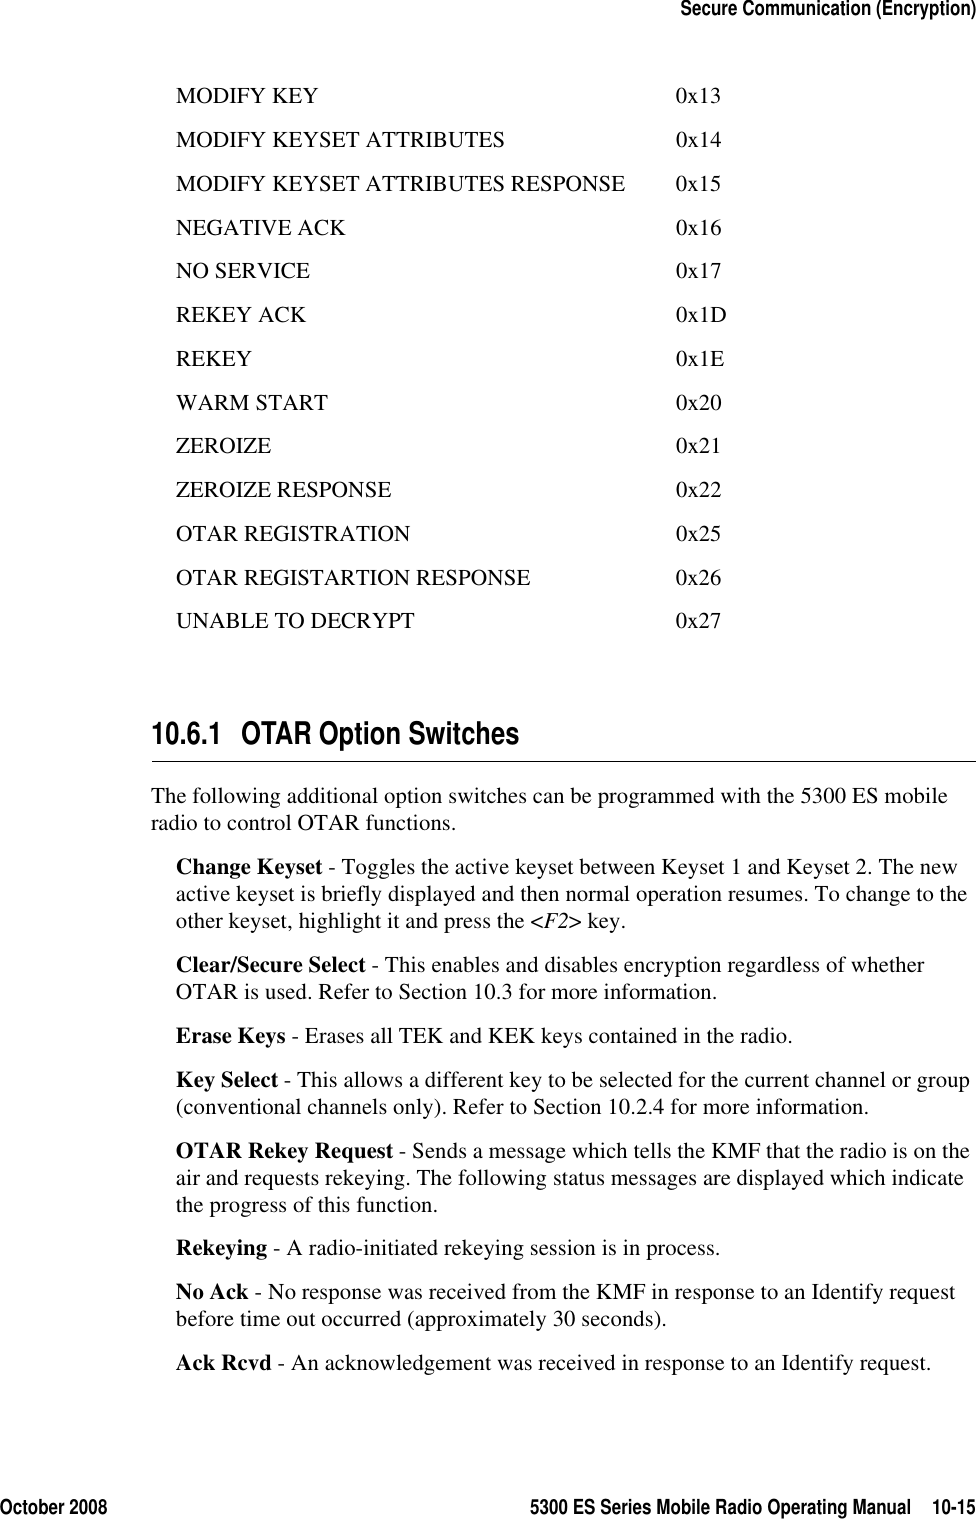 October 2008 5300 ES Series Mobile Radio Operating Manual 10-15Secure Communication (Encryption)MODIFY KEY 0x13MODIFY KEYSET ATTRIBUTES 0x14MODIFY KEYSET ATTRIBUTES RESPONSE 0x15NEGATIVE ACK 0x16NO SERVICE 0x17REKEY ACK 0x1DREKEY 0x1EWARM START 0x20ZEROIZE 0x21ZEROIZE RESPONSE 0x22OTAR REGISTRATION 0x25OTAR REGISTARTION RESPONSE 0x26UNABLE TO DECRYPT 0x2710.6.1 OTAR Option SwitchesThe following additional option switches can be programmed with the 5300 ES mobile radio to control OTAR functions.Change Keyset - Toggles the active keyset between Keyset 1 and Keyset 2. The new active keyset is briefly displayed and then normal operation resumes. To change to the other keyset, highlight it and press the &lt;F2&gt; key.Clear/Secure Select - This enables and disables encryption regardless of whether OTAR is used. Refer to Section 10.3 for more information.Erase Keys - Erases all TEK and KEK keys contained in the radio.Key Select - This allows a different key to be selected for the current channel or group (conventional channels only). Refer to Section 10.2.4 for more information.OTAR Rekey Request - Sends a message which tells the KMF that the radio is on the air and requests rekeying. The following status messages are displayed which indicate the progress of this function.Rekeying - A radio-initiated rekeying session is in process.No Ack - No response was received from the KMF in response to an Identify request before time out occurred (approximately 30 seconds).Ack Rcvd - An acknowledgement was received in response to an Identify request.